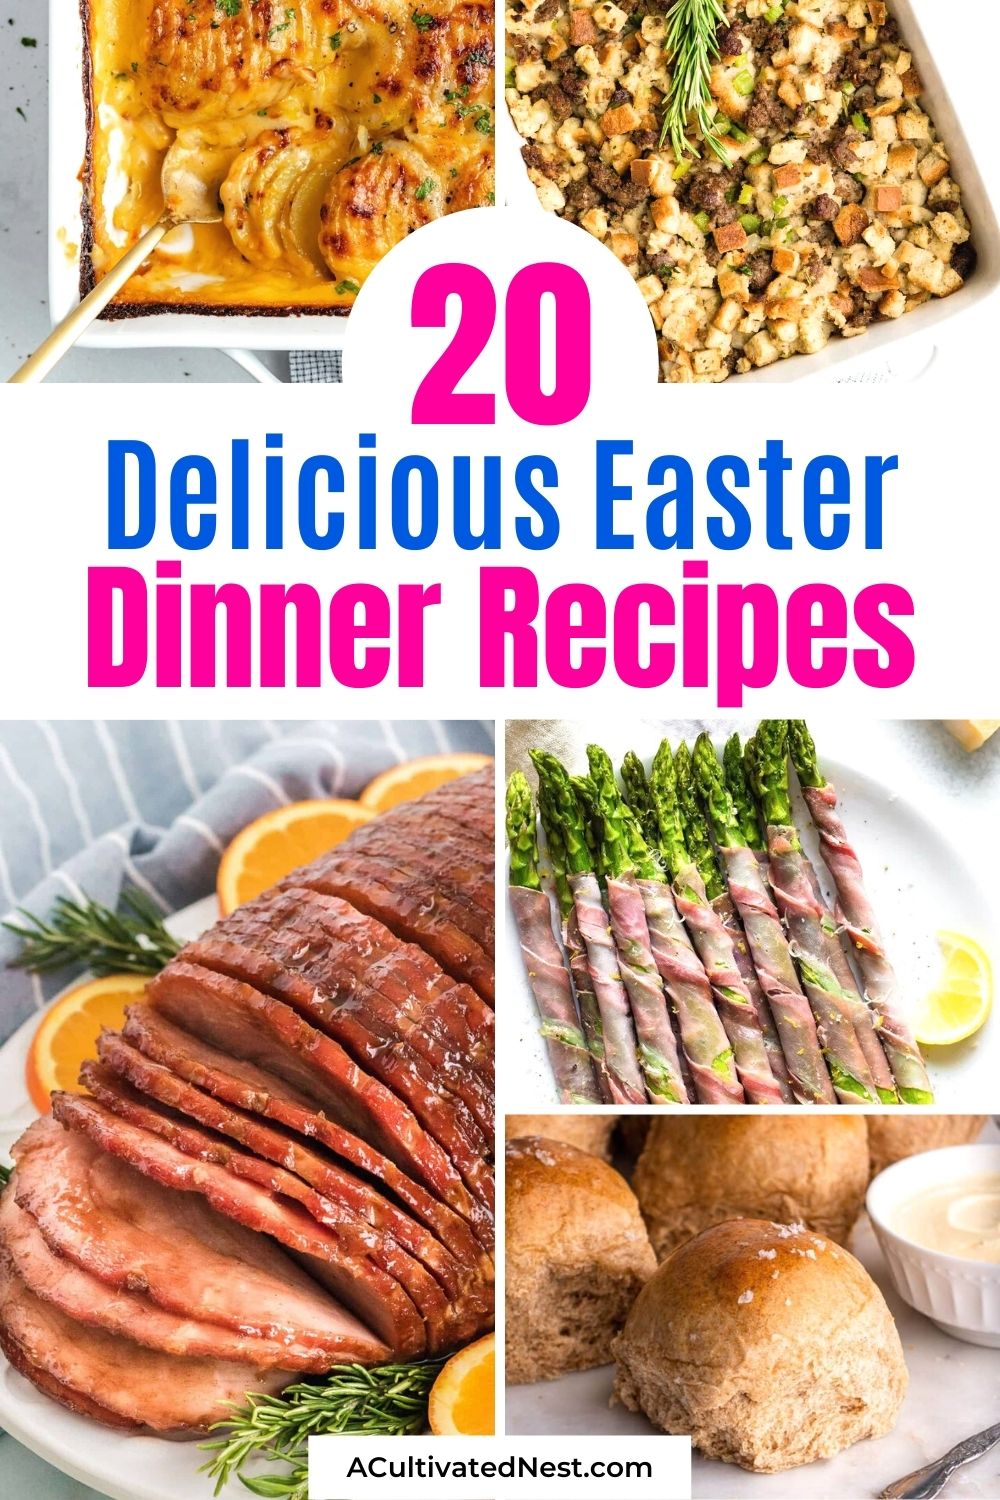 20 Delicious Easter Dinner Recipes- If you're looking to change things up this Easter, these Easter dinner recipes will please your crowd! Most of these recipes are a delicious new spin on an old classic menu item! | #EasterRecipes #recipe #dinner #dinnerRecipes #ACultivatedNest